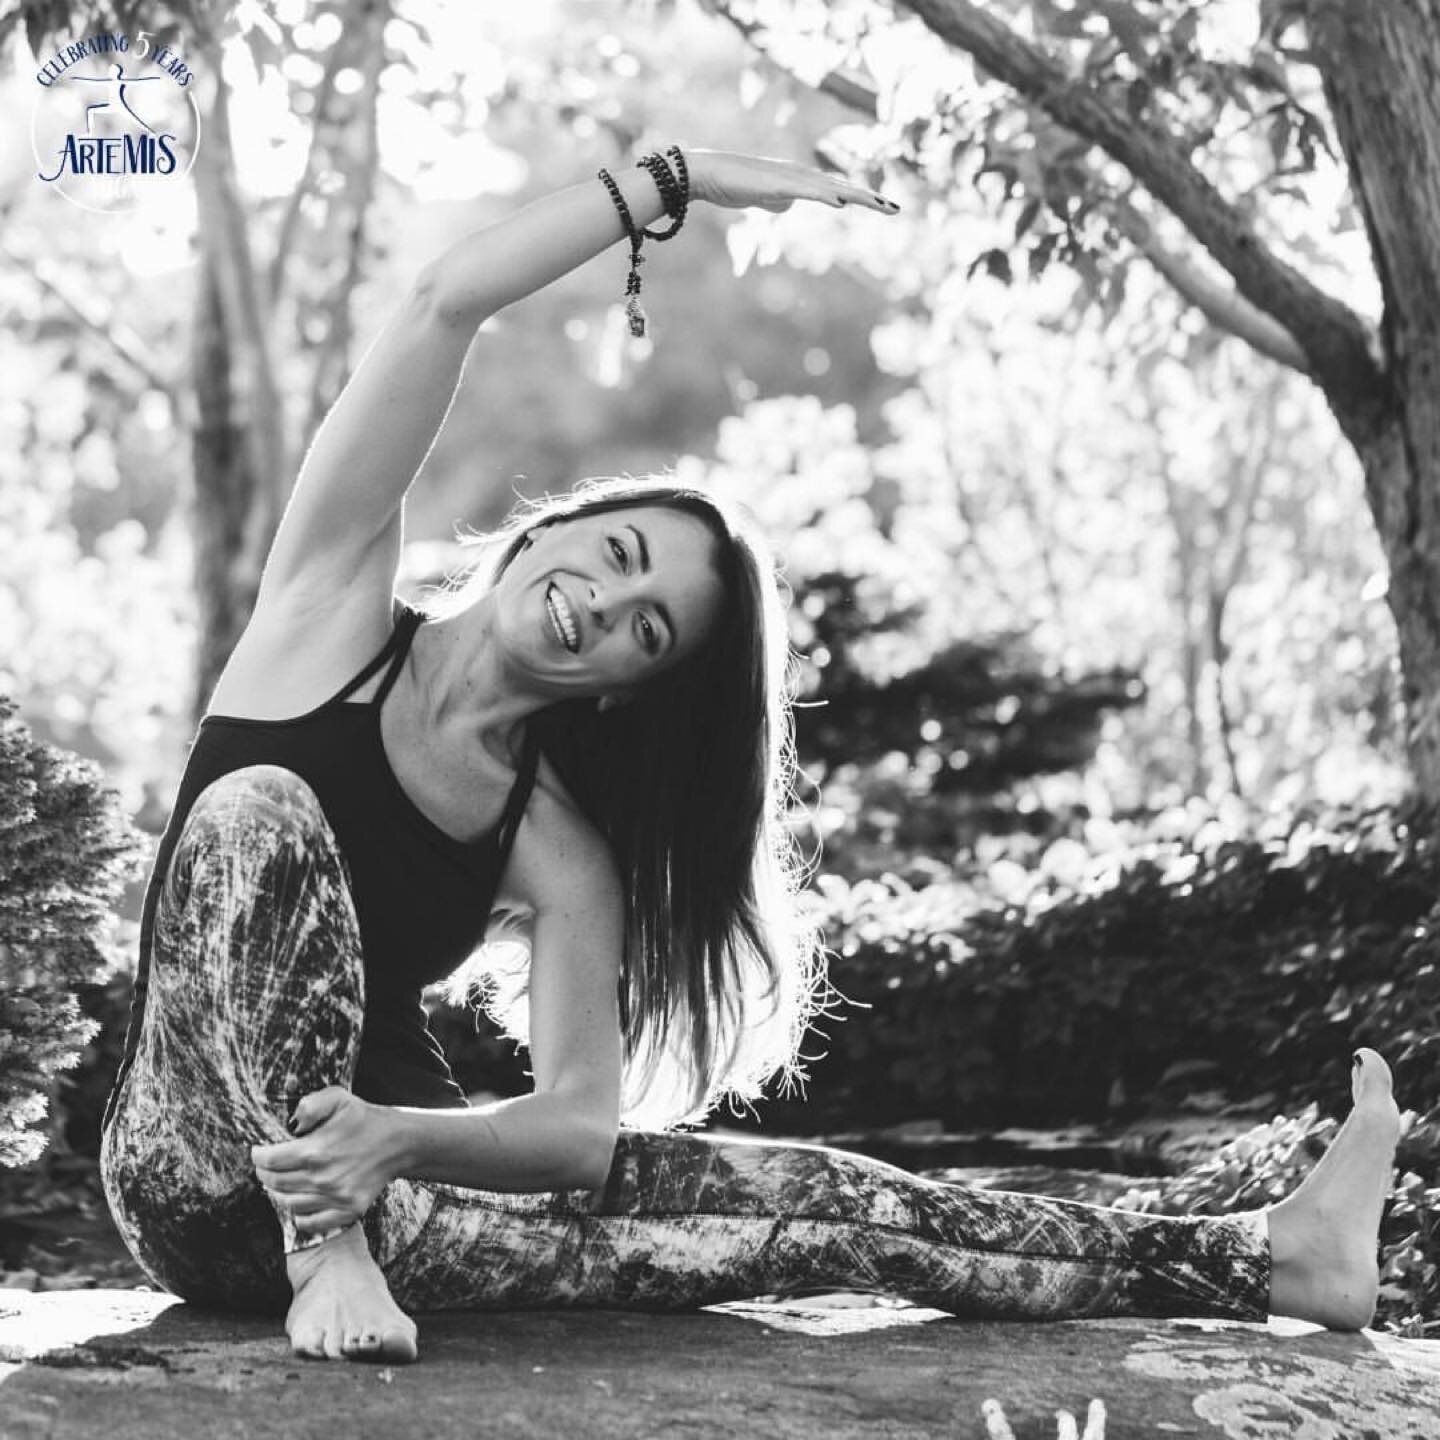 🚨New class alert! 🚨Starting TOMORROW, September 24th, join Tracy for her new Flow class at 5:30pm 🎉

We love practicing on Friday nights, and this Flow class is a welcome addition to our Friday schedule. In this 60-minute in studio offering, you'l